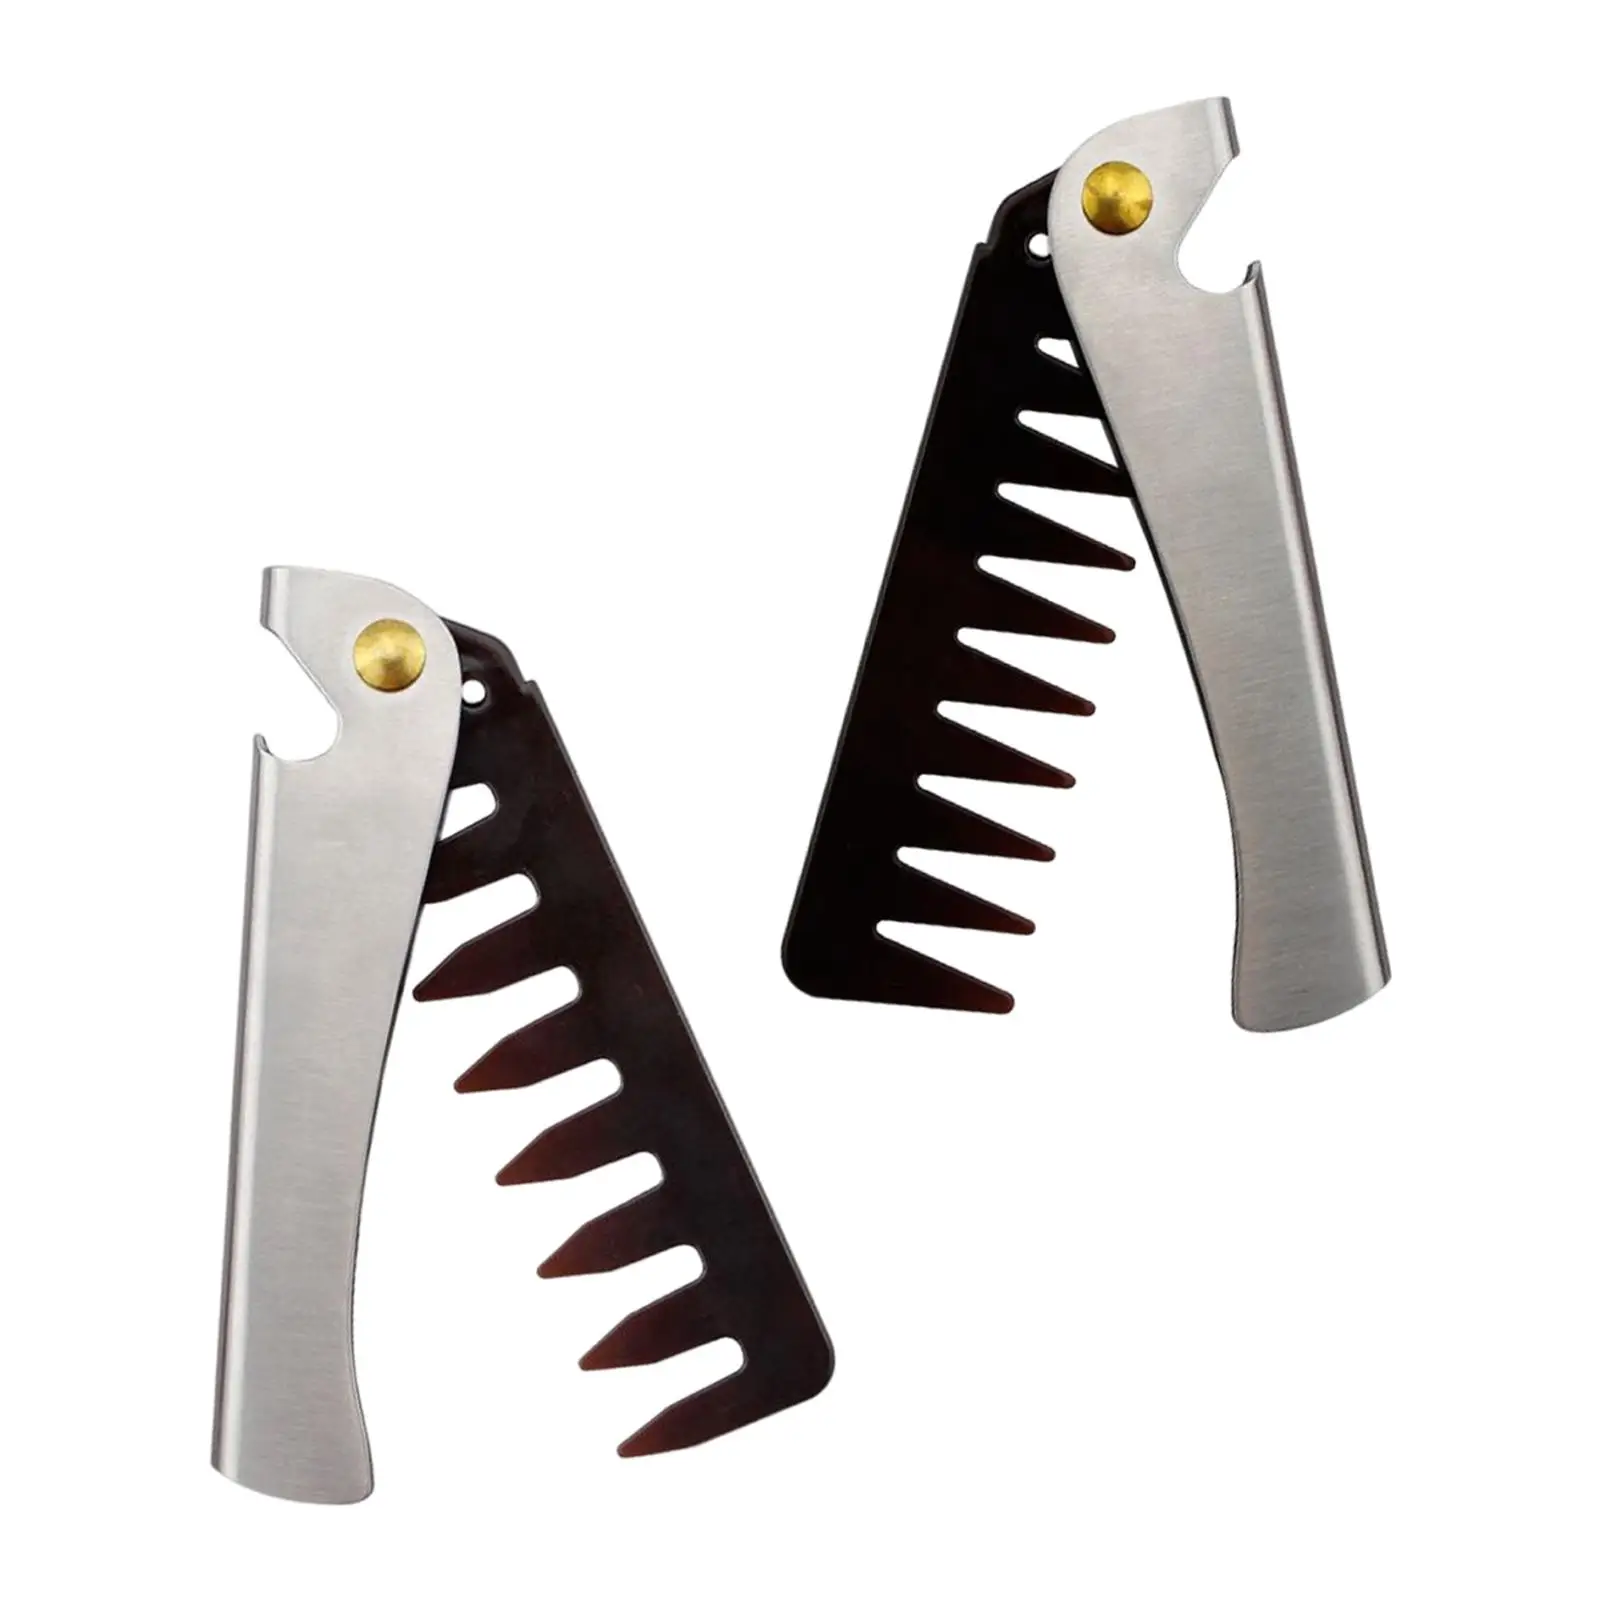 Folding Beard Comb for Men Stainless Steel Gift Grooming Combing Hair Pocket Comb for Travel